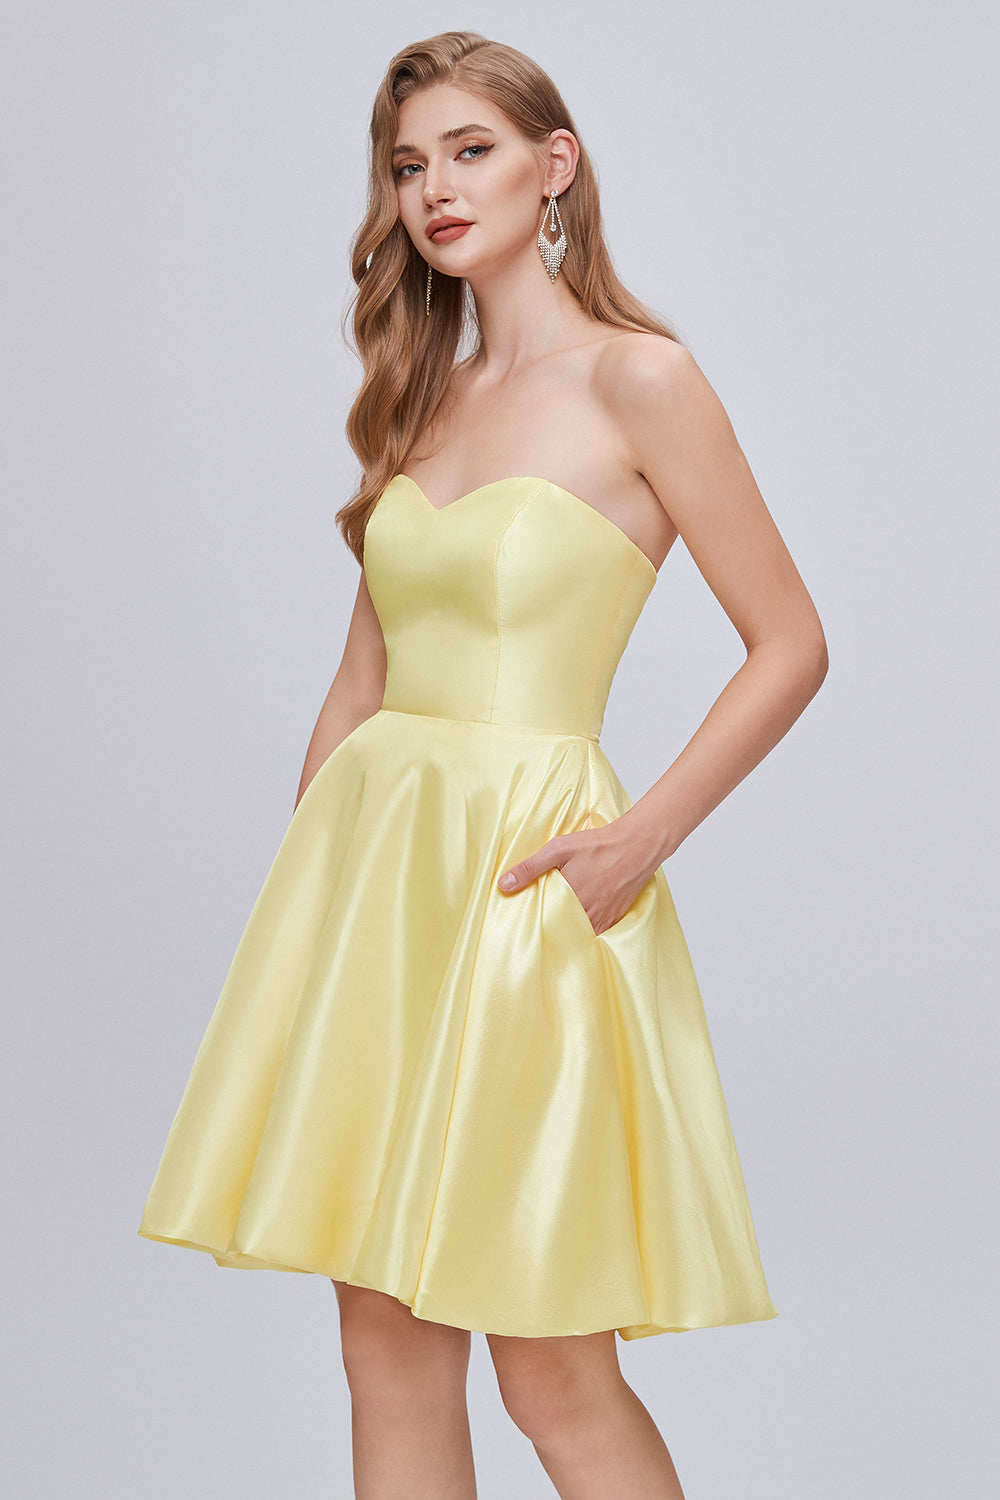 Simple Yellow Strapless A Line Short Homecoming Dresses With Pockets